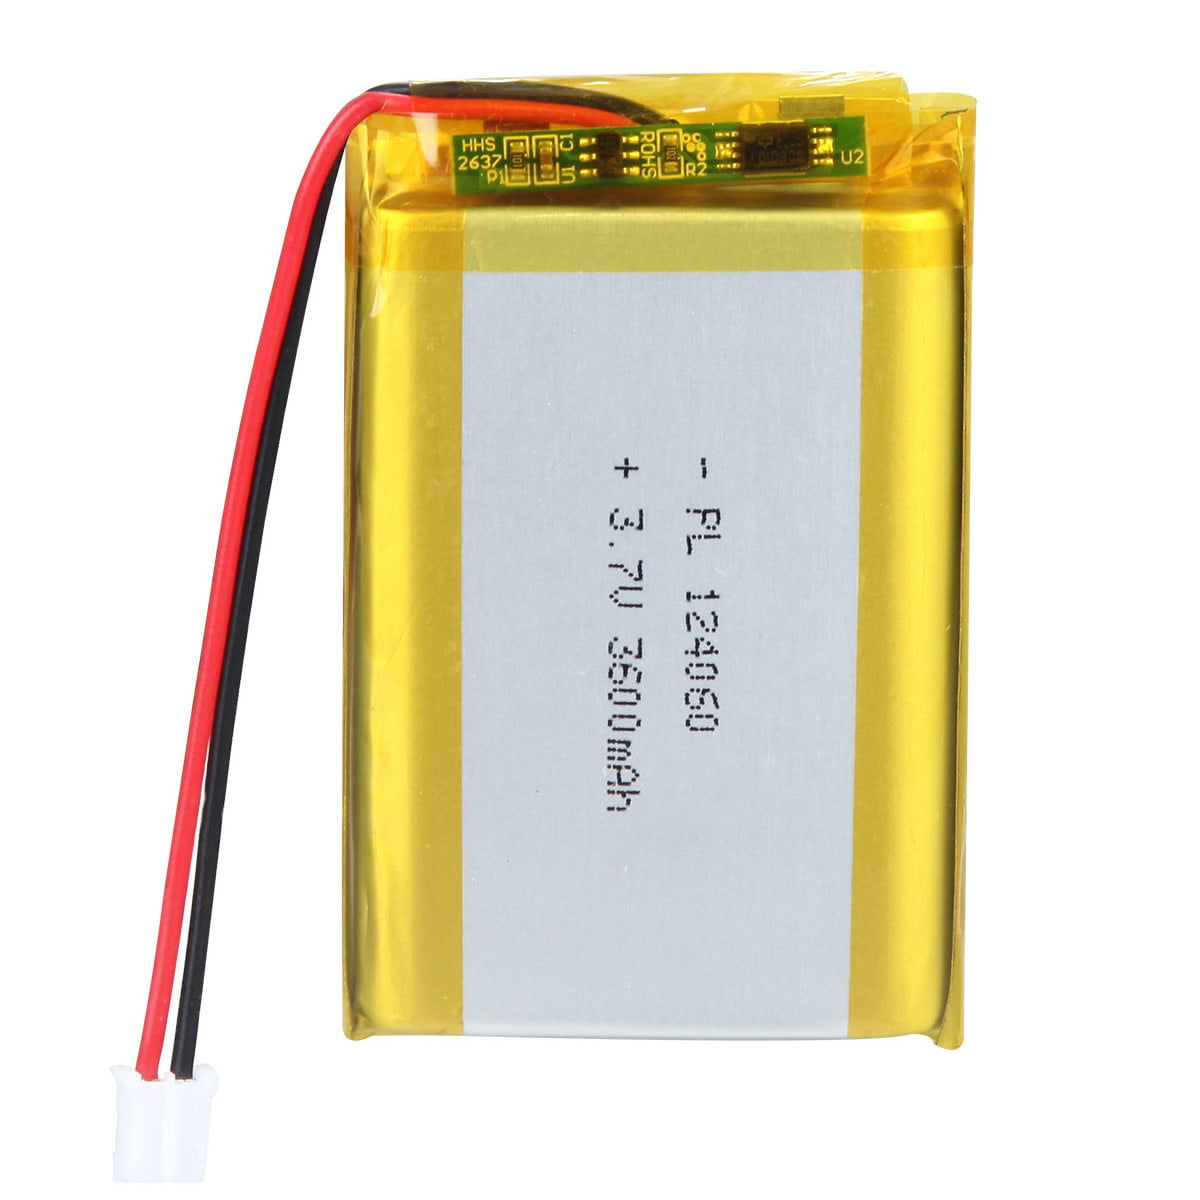 AKZYTUE 3.7V 5000mAh 6060100 Lipo Battery Rechargeable Lithium Polymer ion Battery Pack with JST Connector 